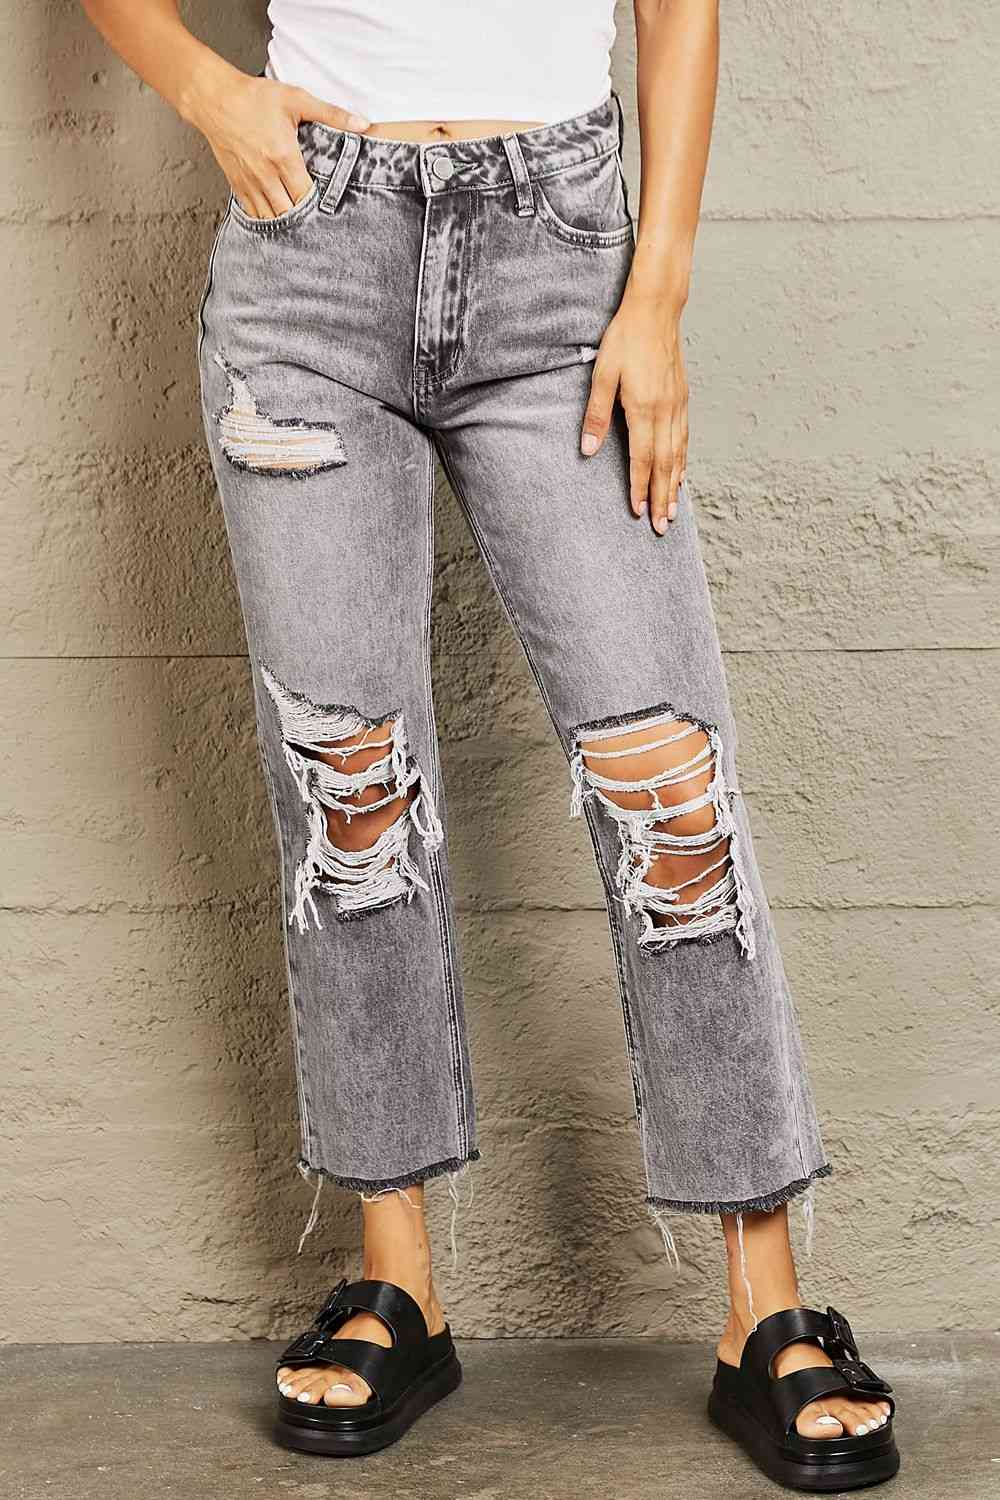 BAYEAS Acid Wash Distressed Cropped Straight Jeans Jeans Trendsi Heather Gray 24 